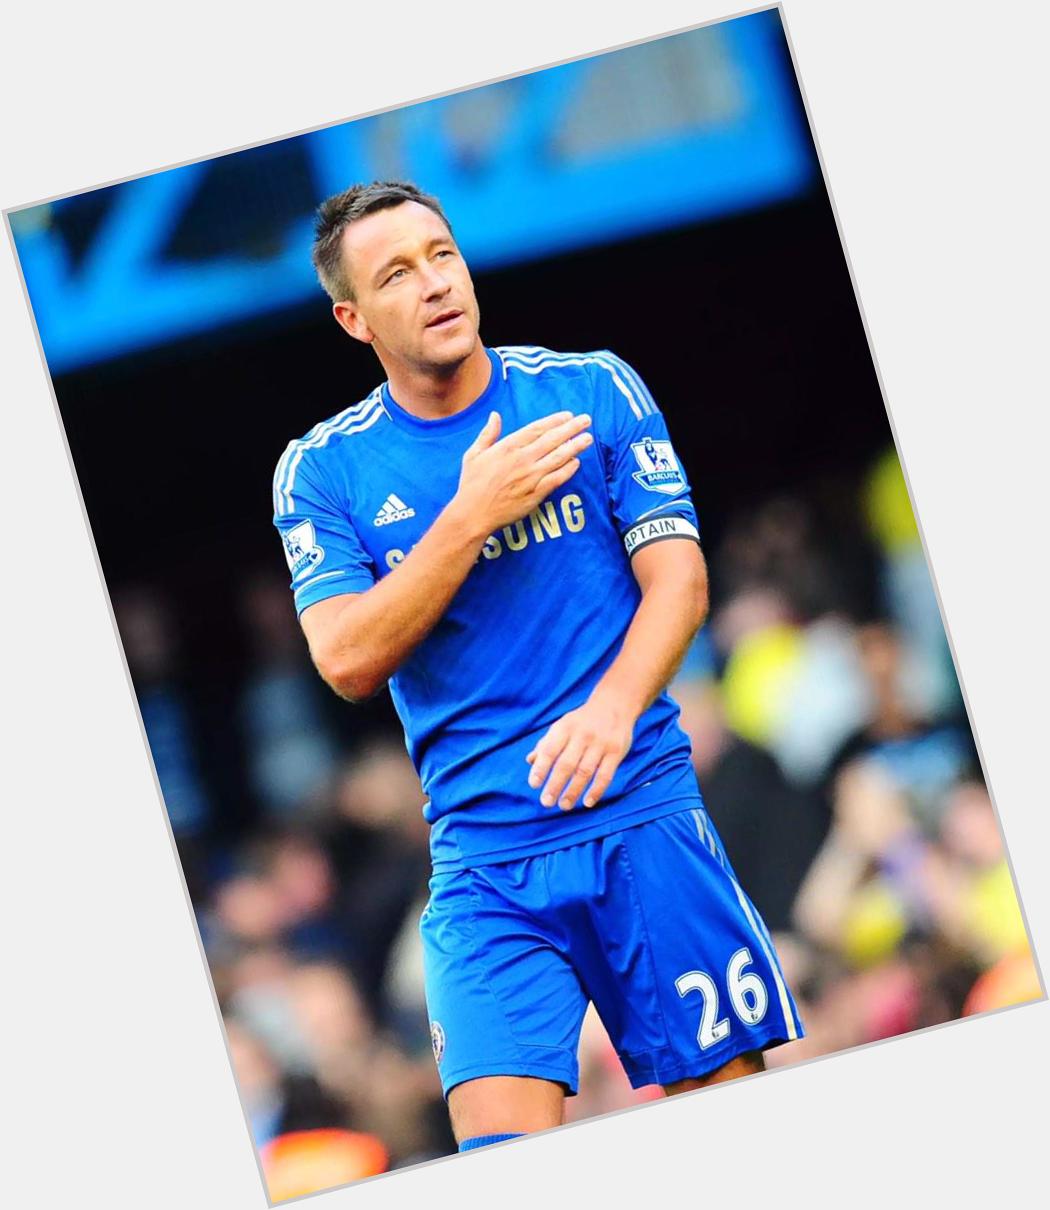 Happy birthday to the man who has devoted his entire career to our football club..our captain, John Terry!  